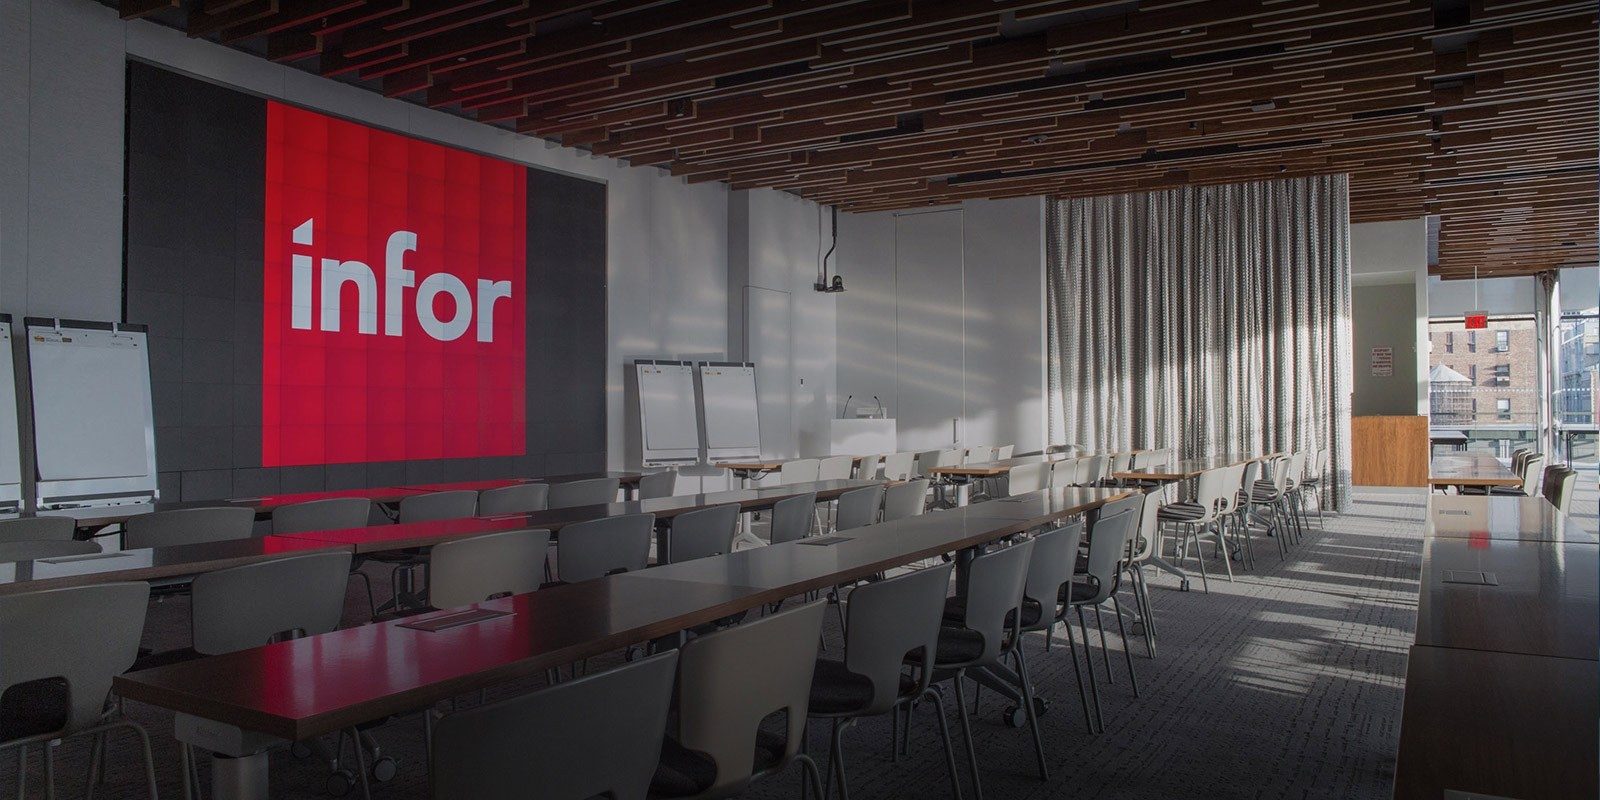 Koch Industries acquires Infor in deal pegged at nearly $13B | TechCrunch